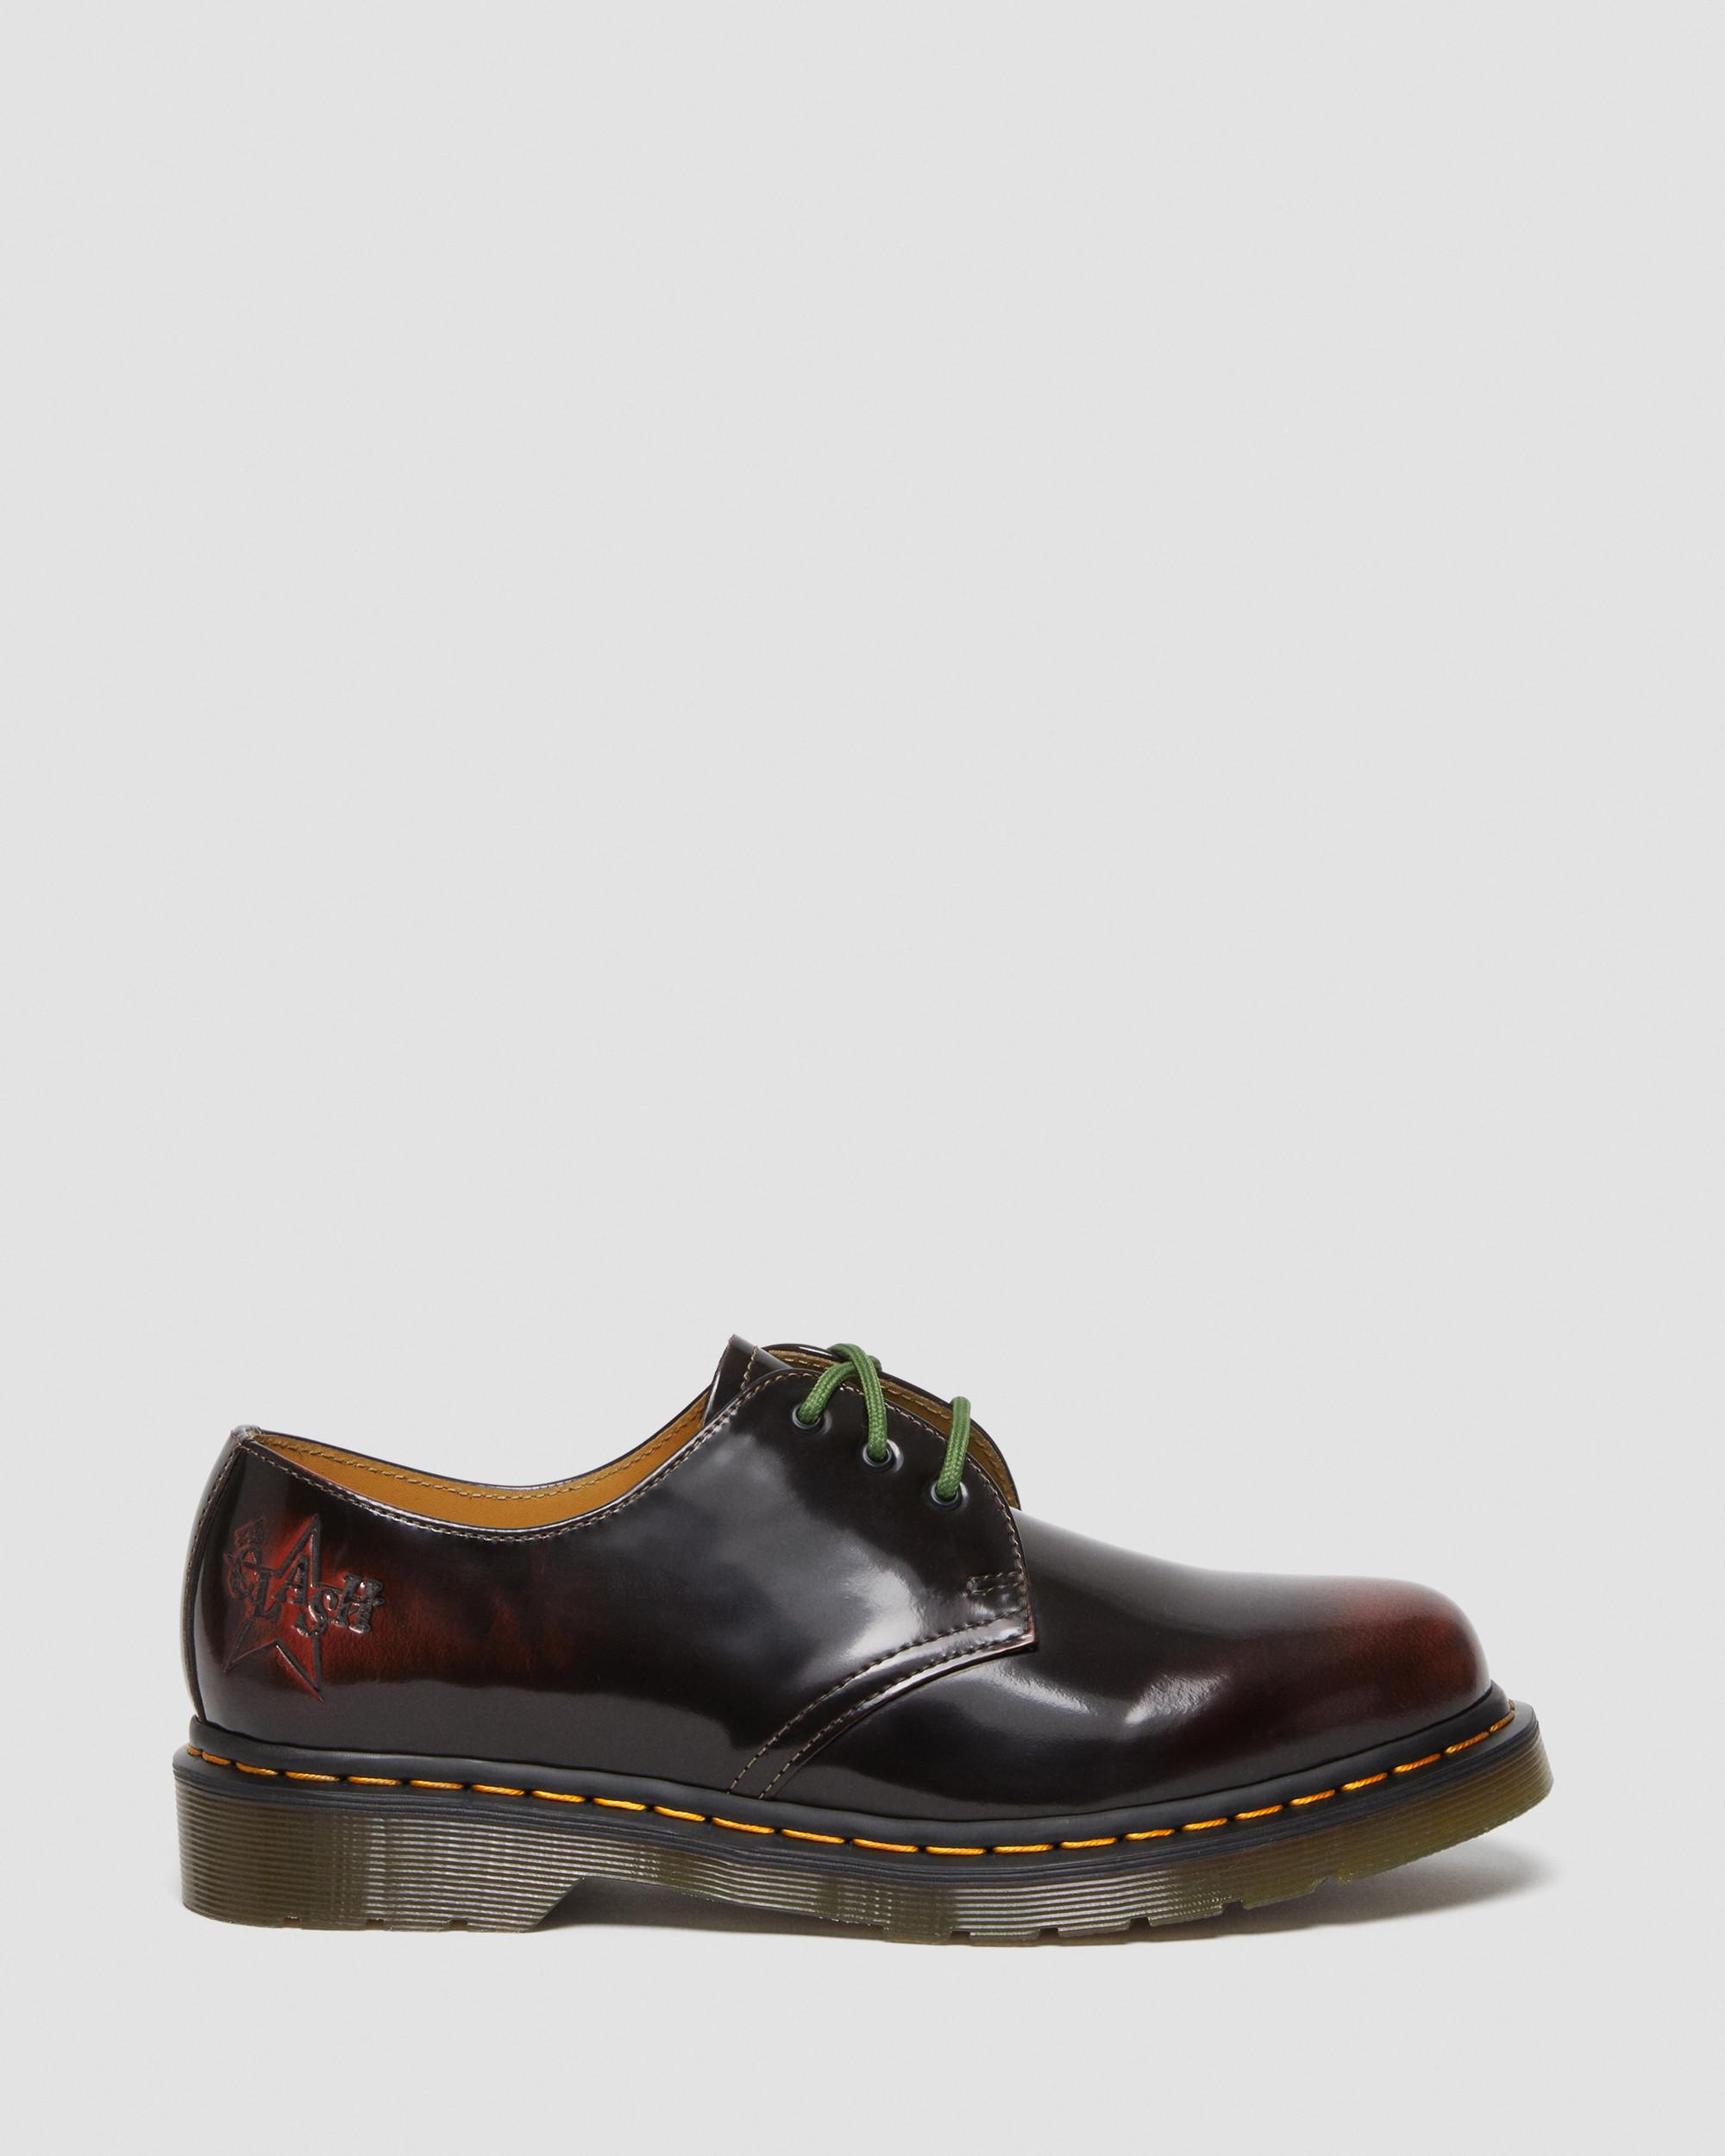 DR MARTENS 1461 THE CLASH Arcadia Leather Shoes